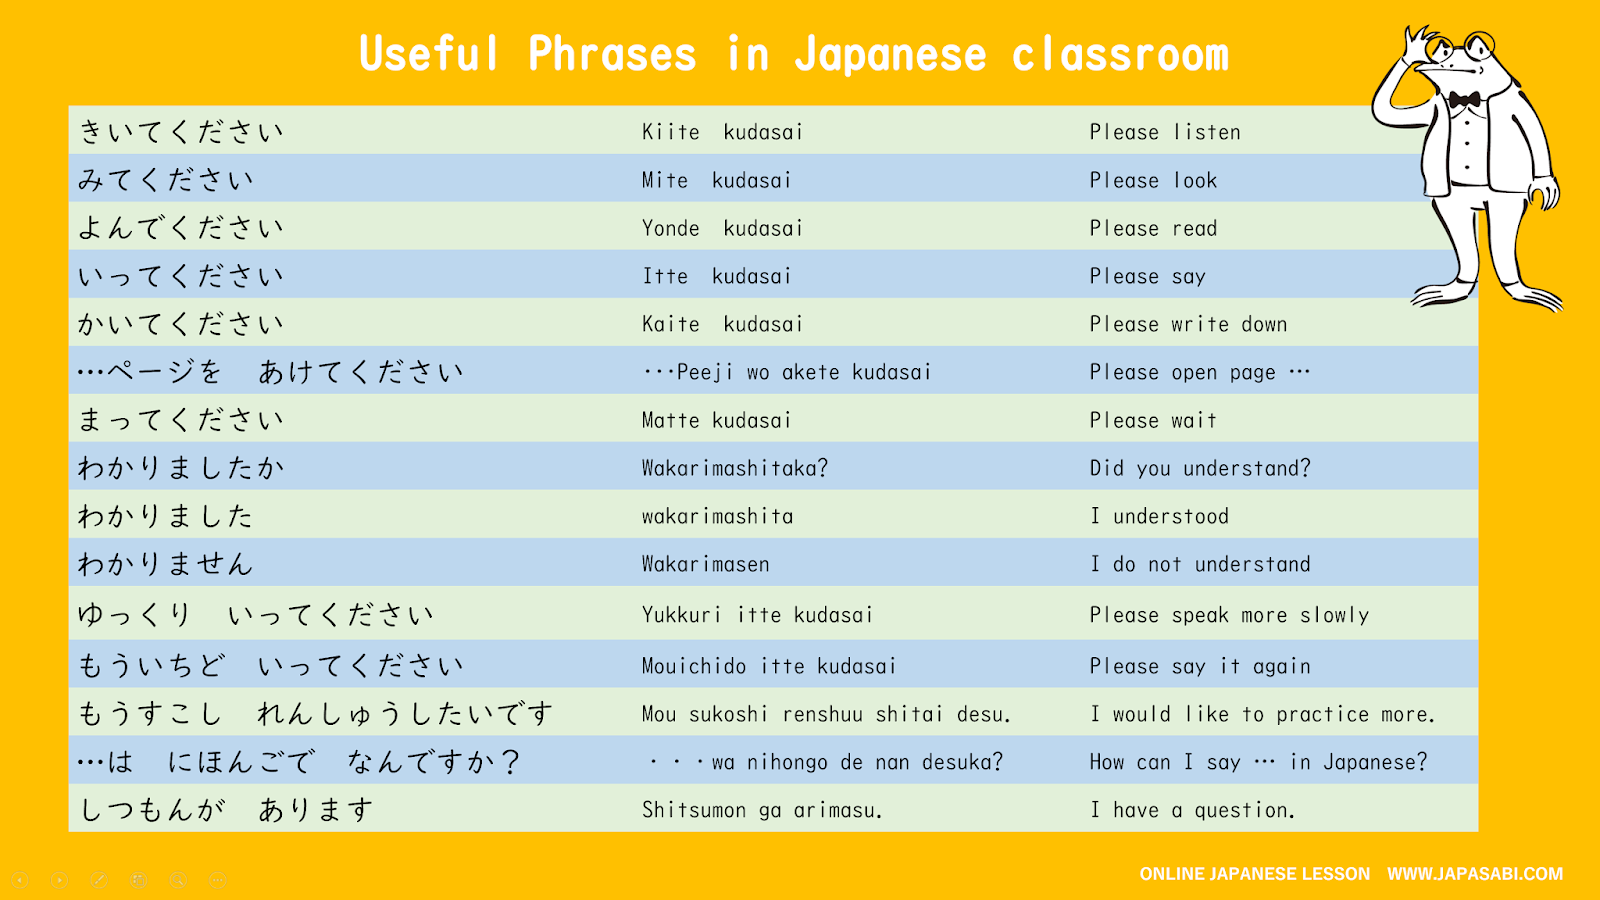 15 Useful Phrases In Japanese Classroom.